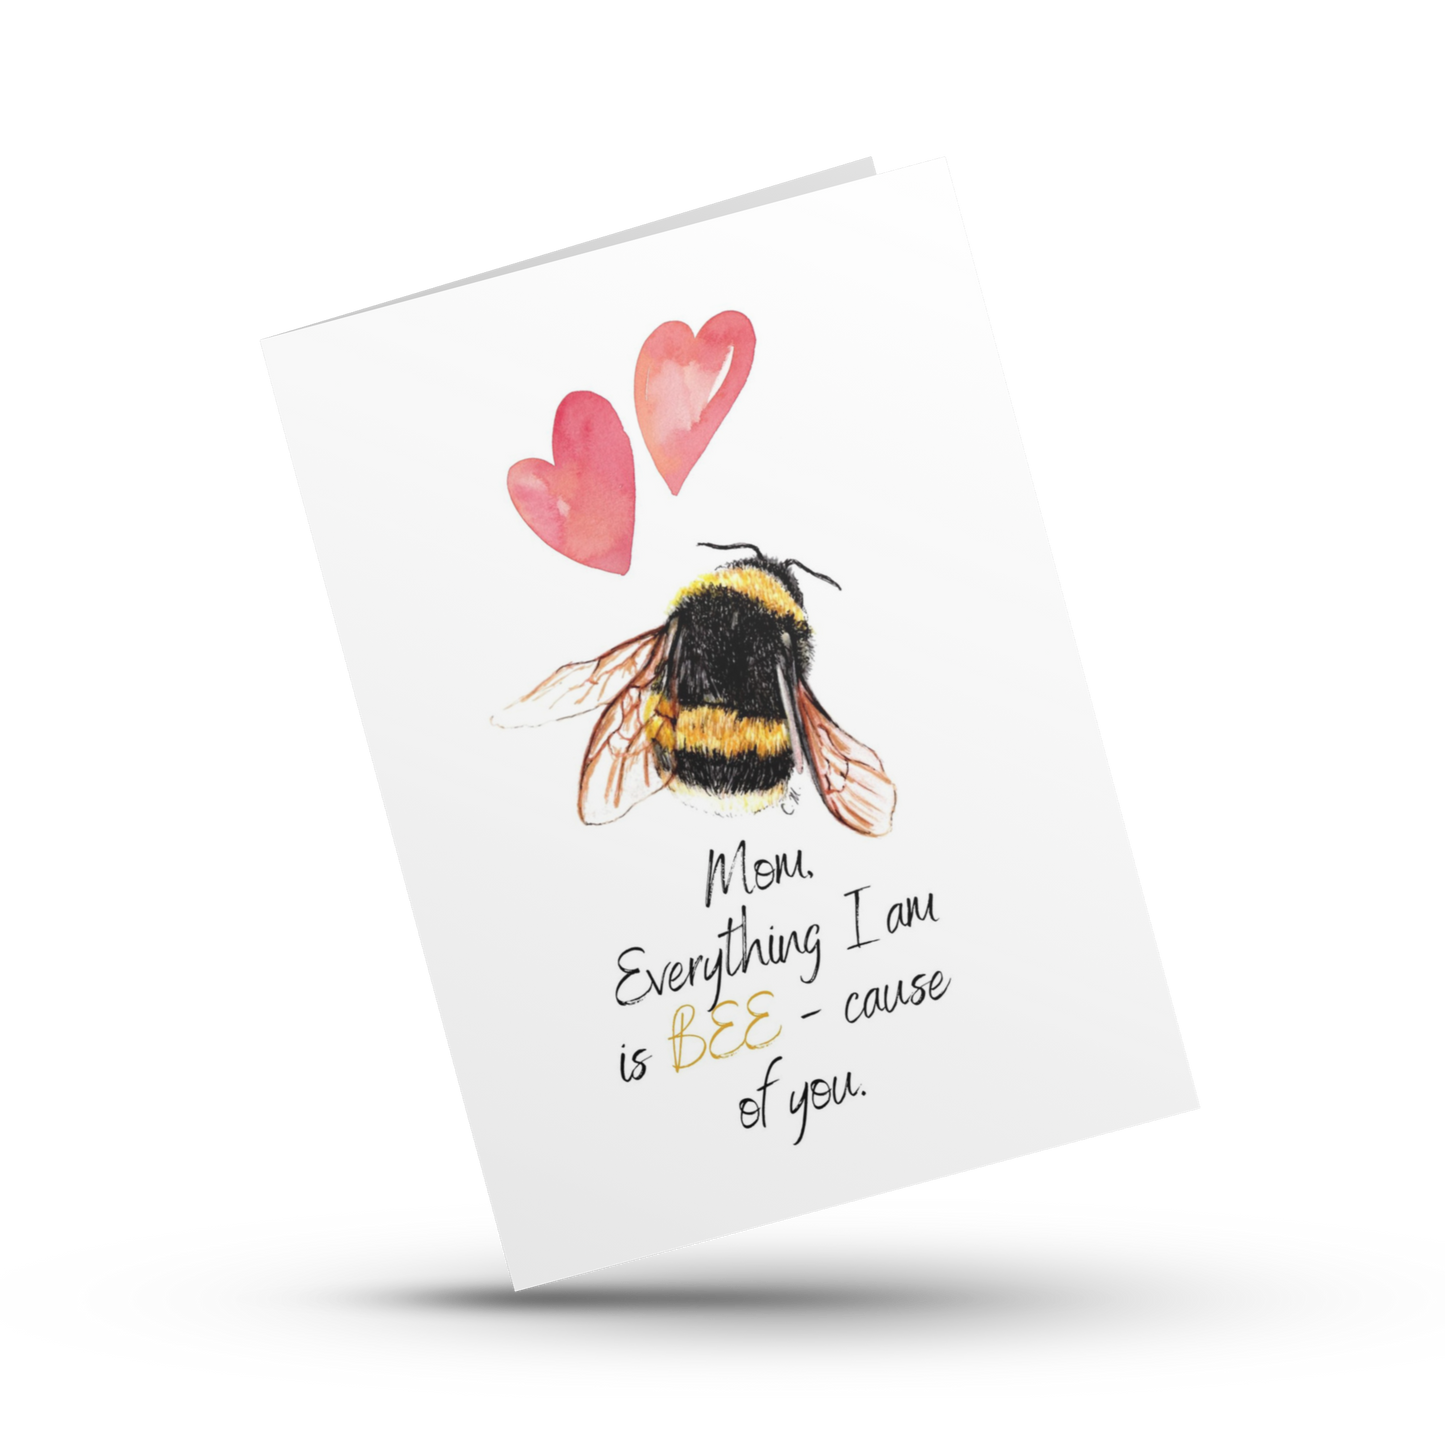 Mom everything I am is because of you, Bee-cause of you mom, Mother's Day card, Bee pun card, Cute bee card for mom, Appreciation card, Love